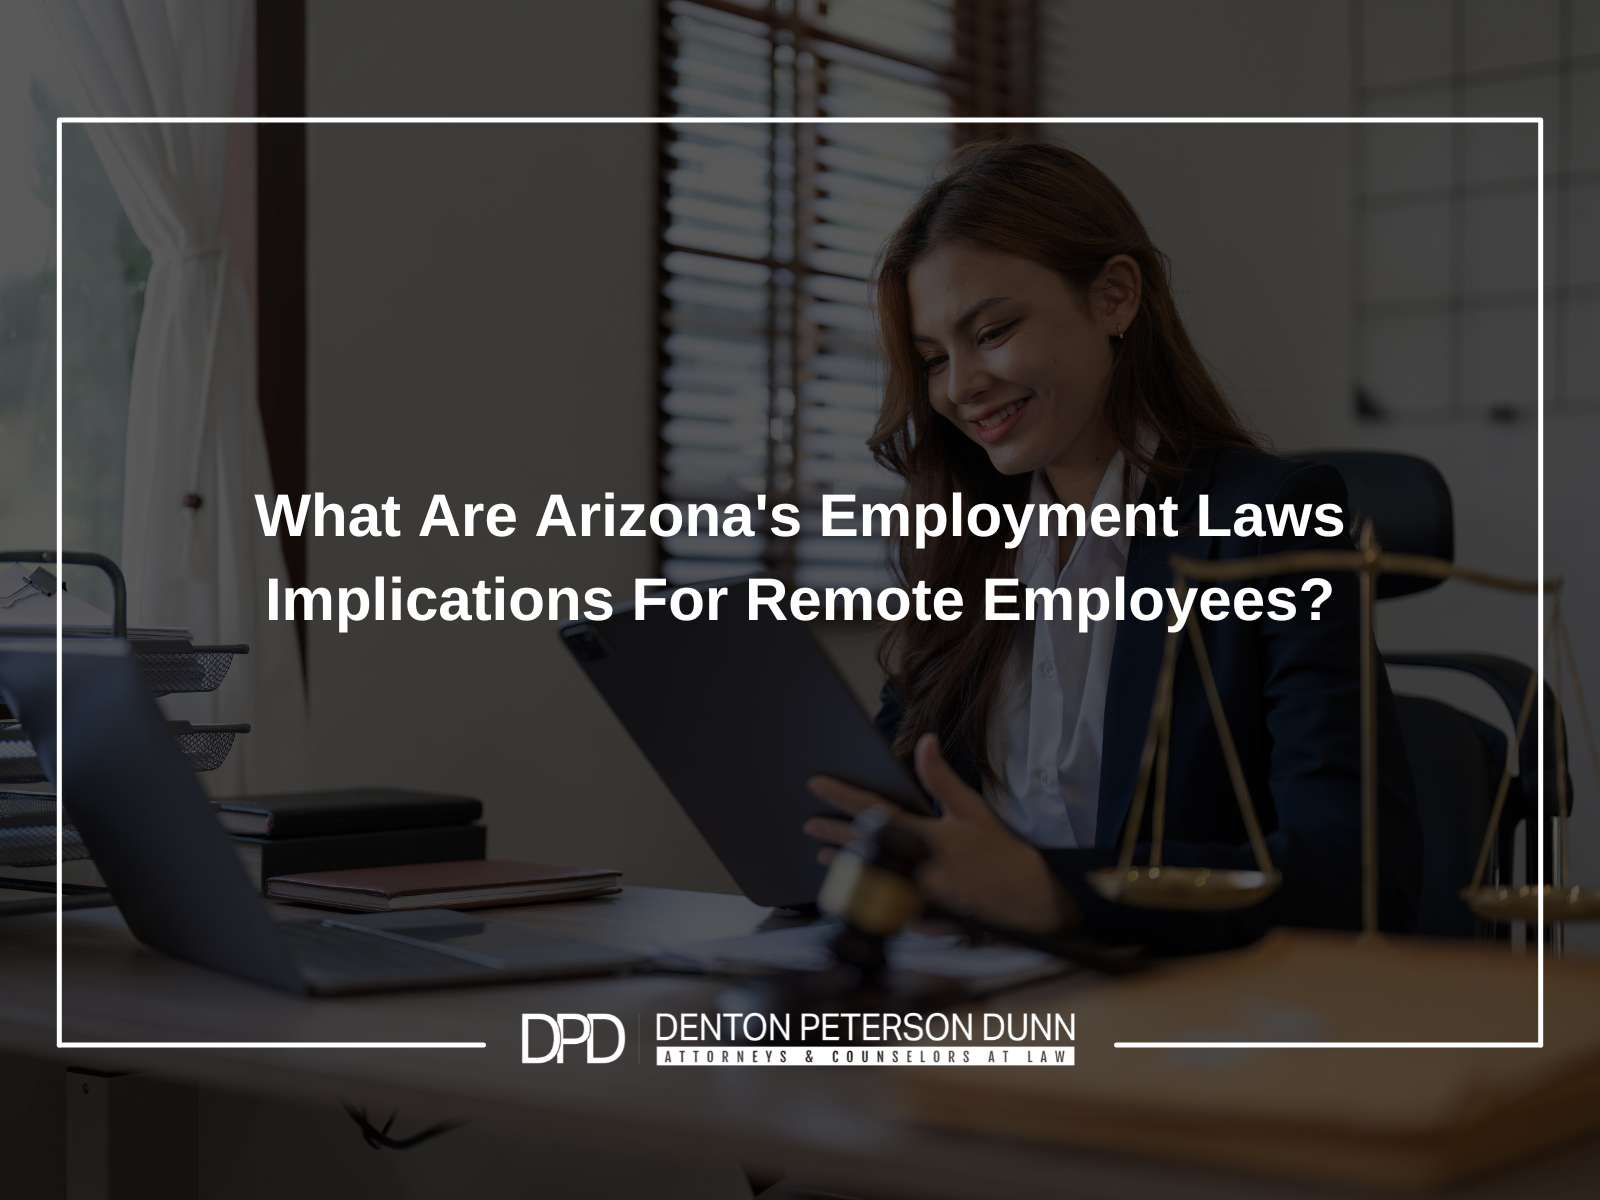 What Are Arizona's Employment Laws Implications For Remote Employees?